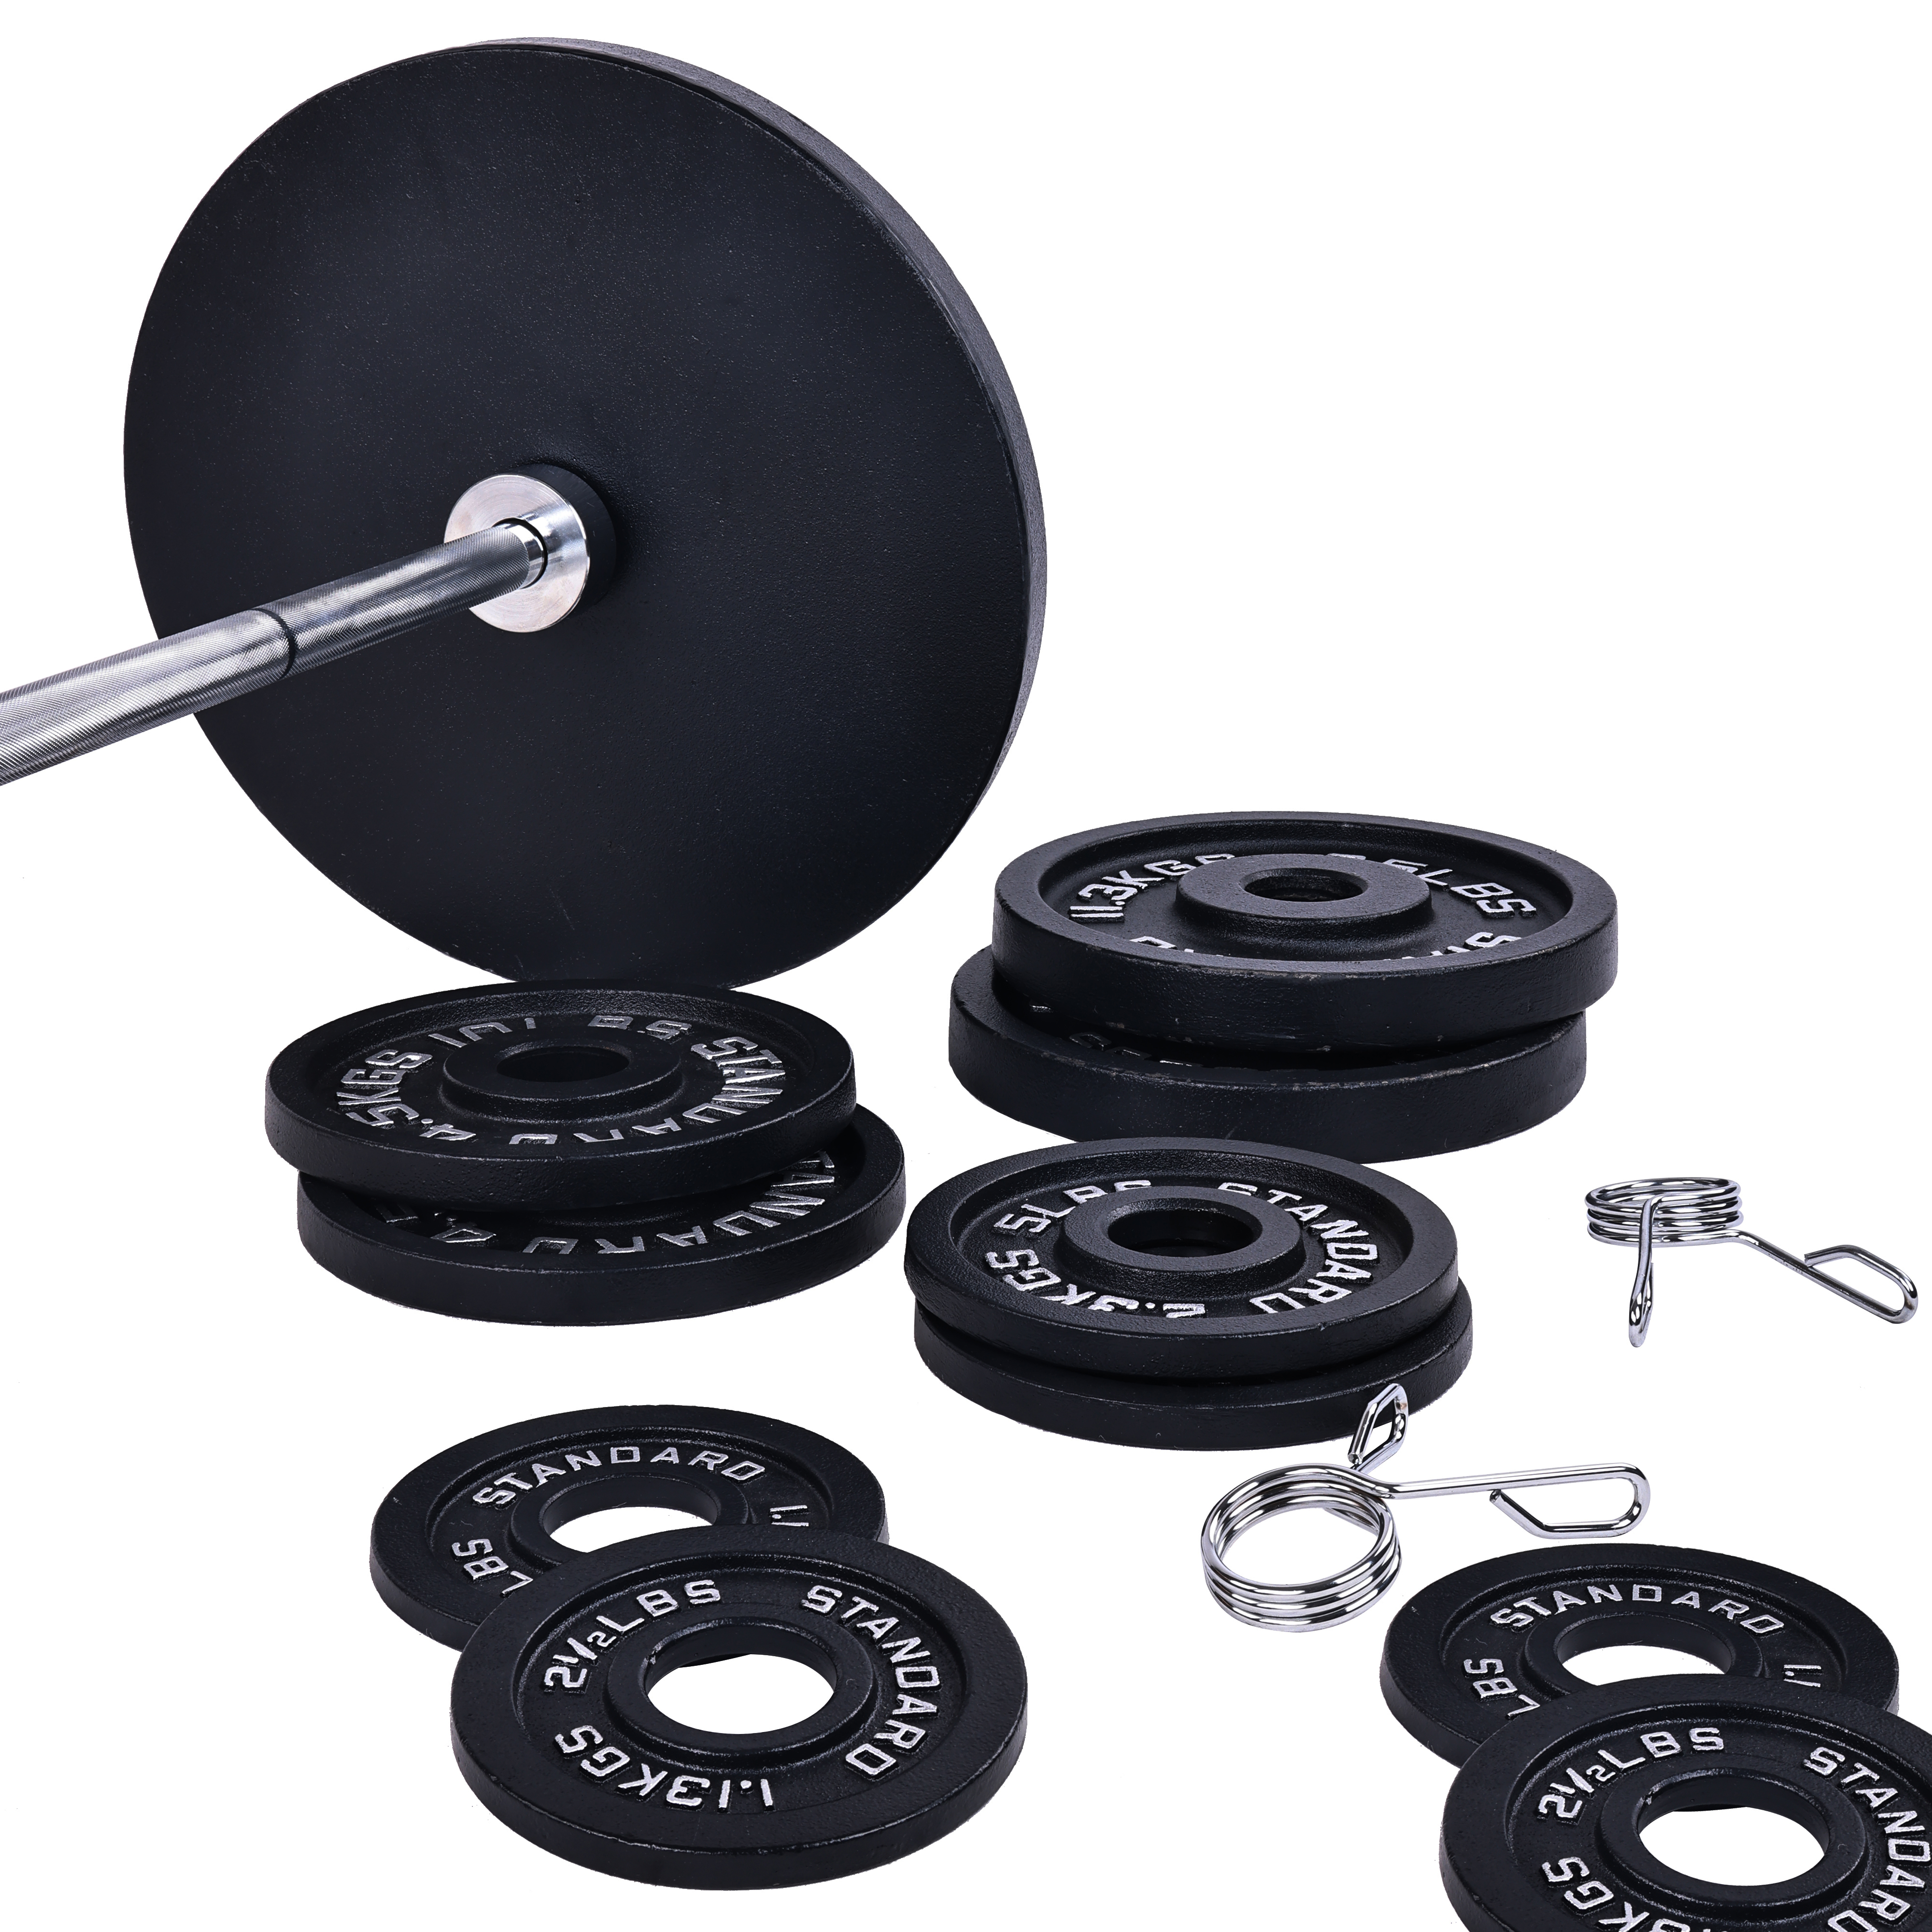 BalanceFrom Cast Iron Olympic Weight Including 7FT Olympic Barbell and Clips, 300-Pound Set (255 Pounds Plates + 45 Pounds Barbell), Multiple Packages - image 4 of 6